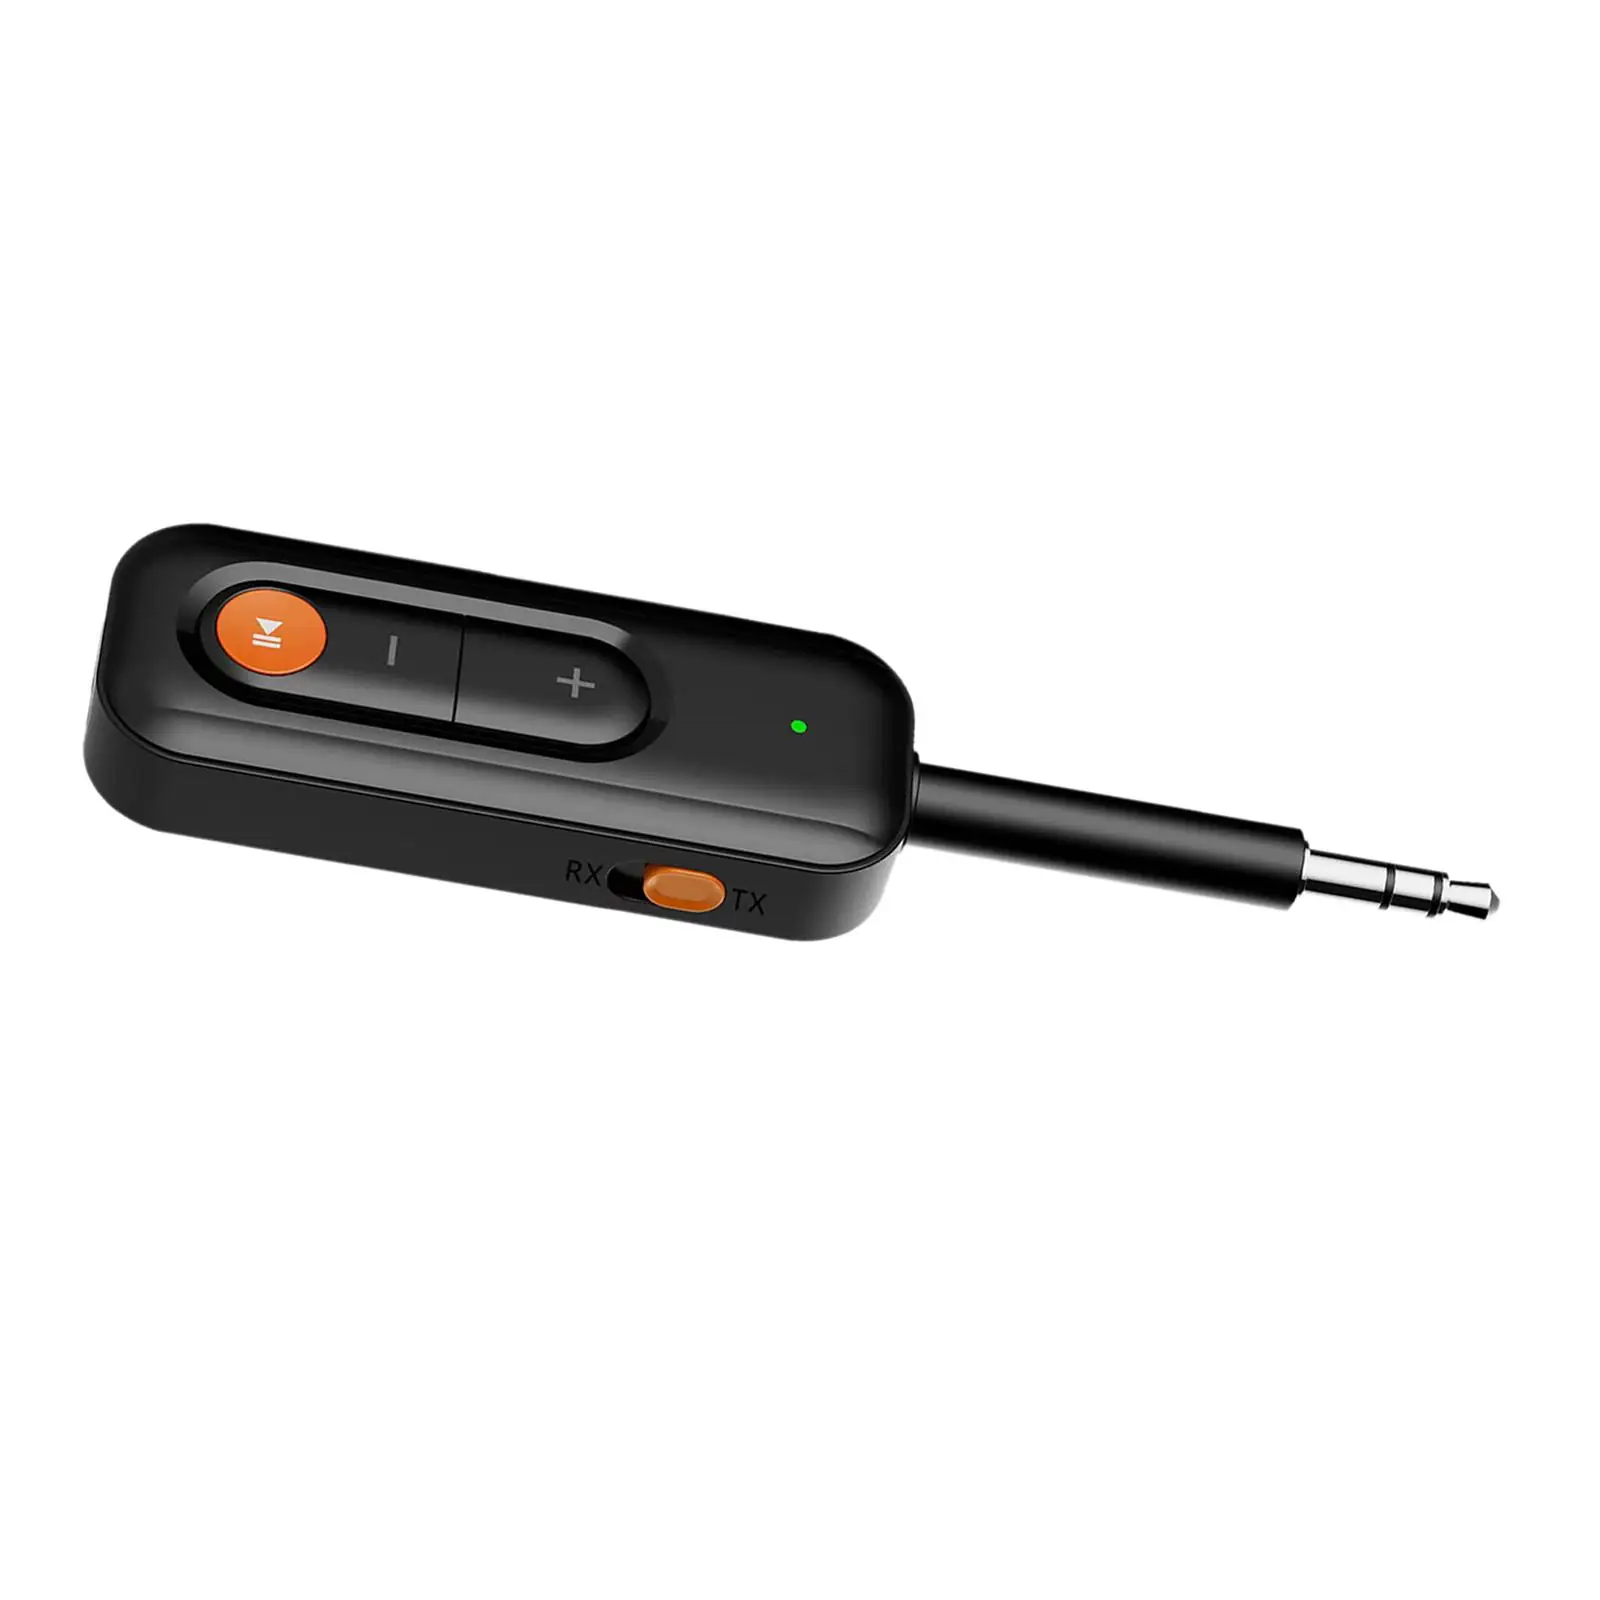 Audio Transmitter and Receiver Transceiver Noise Canceling Lightweight Portable Car AUX Audio Adapter for Home Stereo System PC